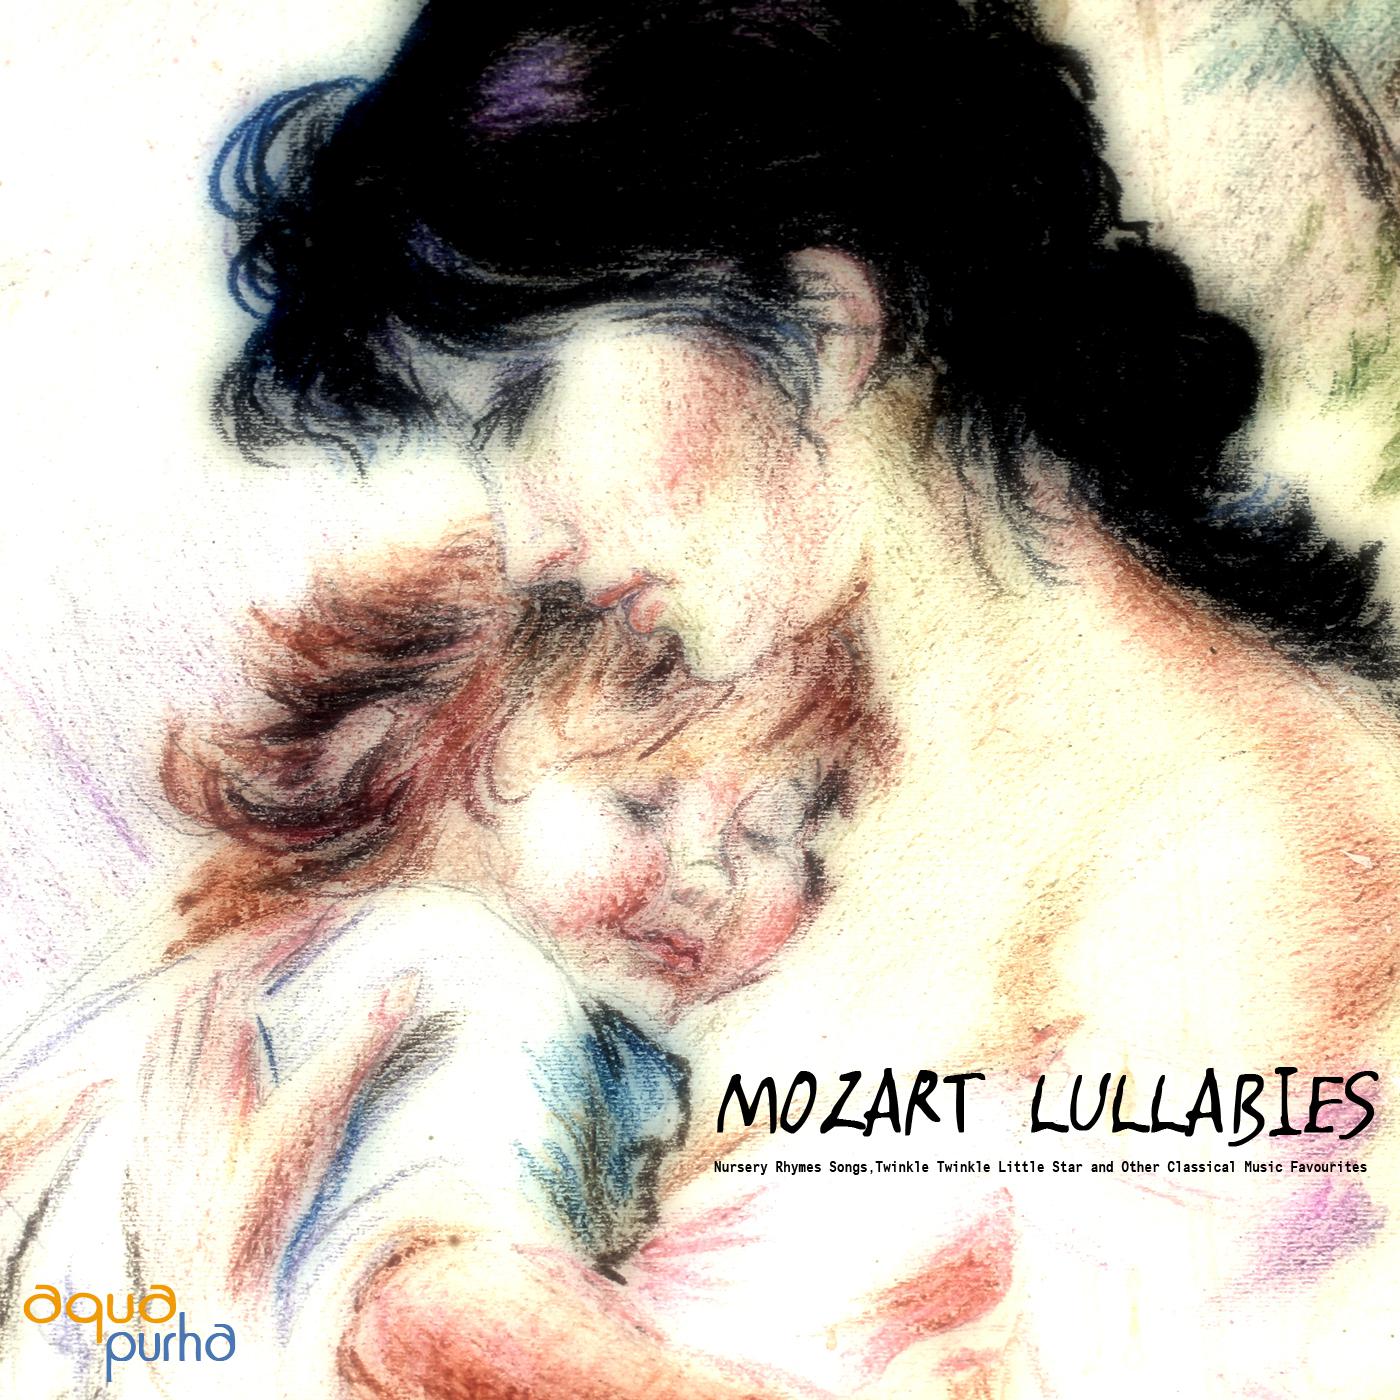 Mozart Lullabies, Nursery Rhymes Songs, Twinkle Twinkle Little Star and Other Classical Music Favourites. Mozart for Baby